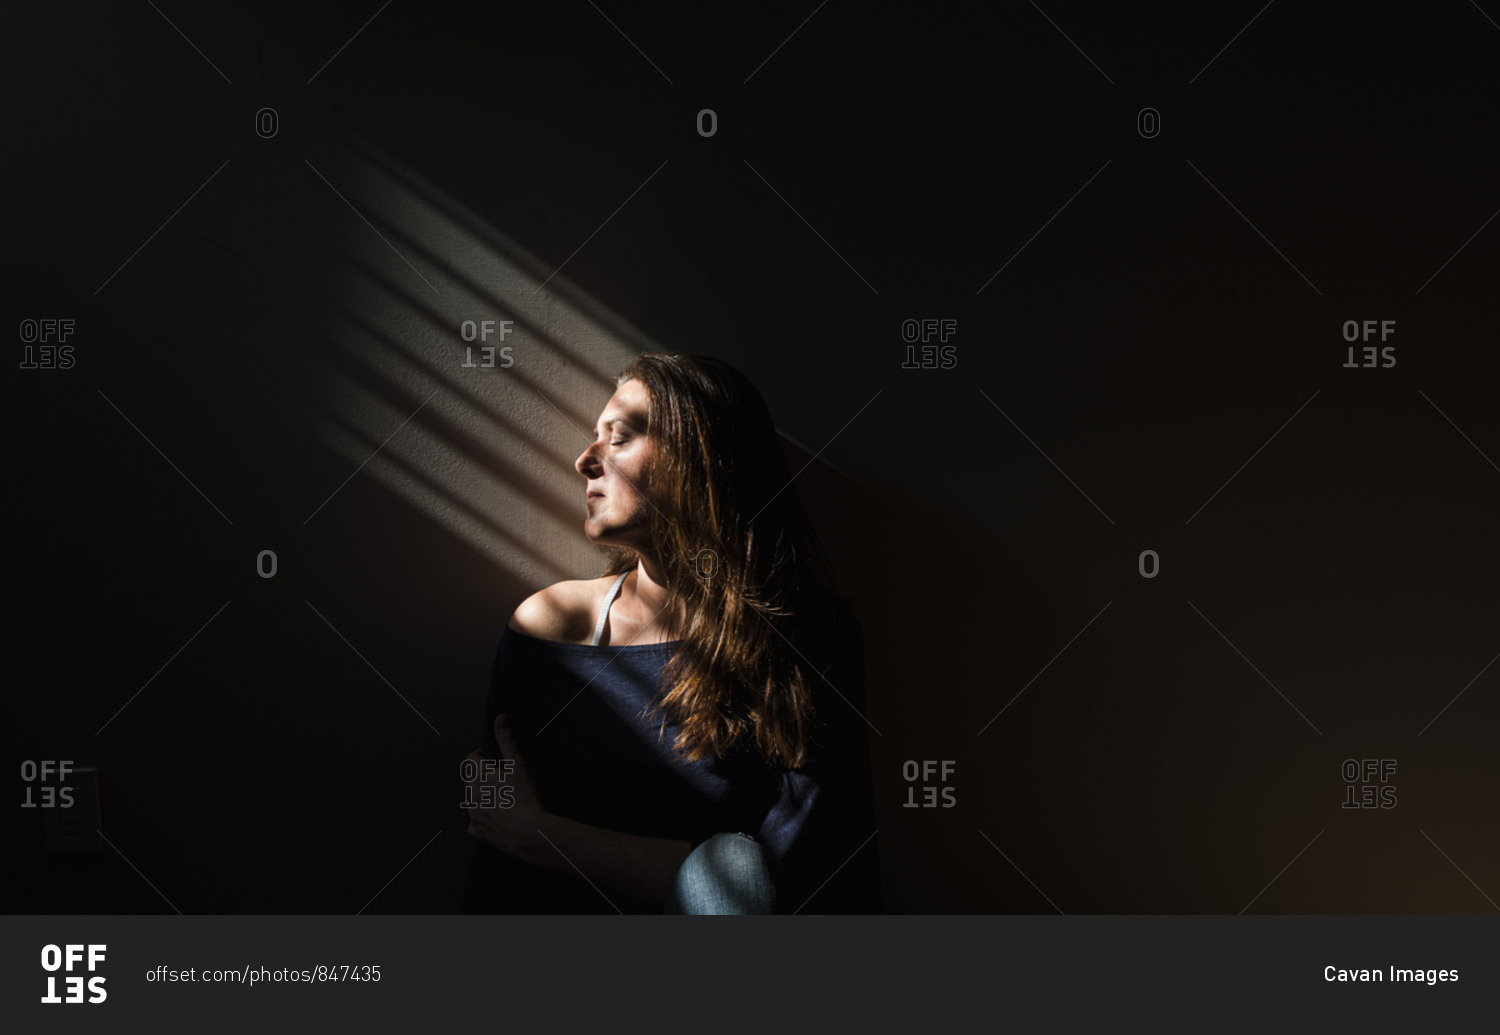 Profile of a woman sitting in a patch of light in a darkened room.